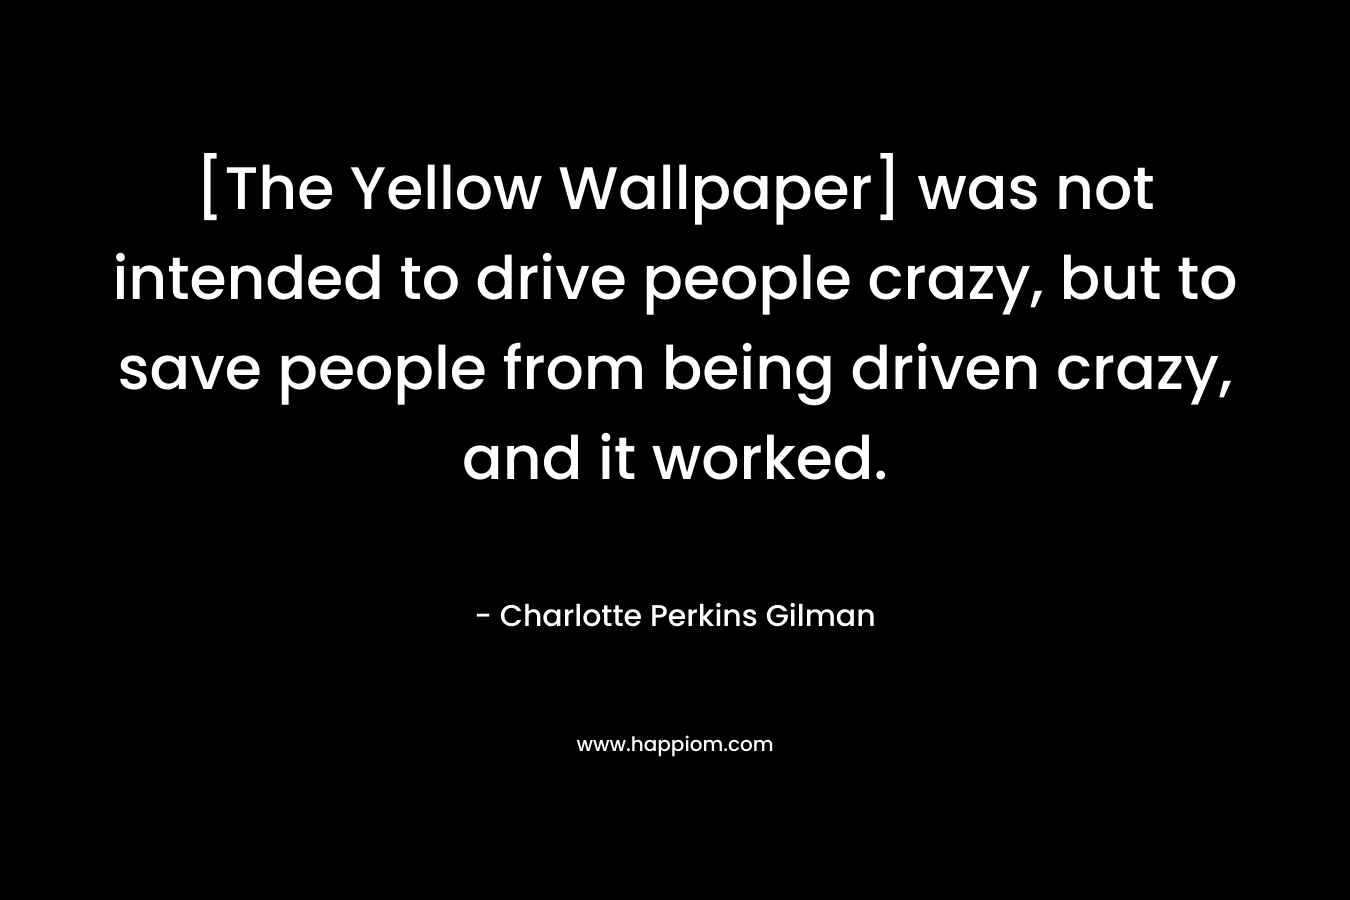 [The Yellow Wallpaper] was not intended to drive people crazy, but to save people from being driven crazy, and it worked. – Charlotte Perkins Gilman